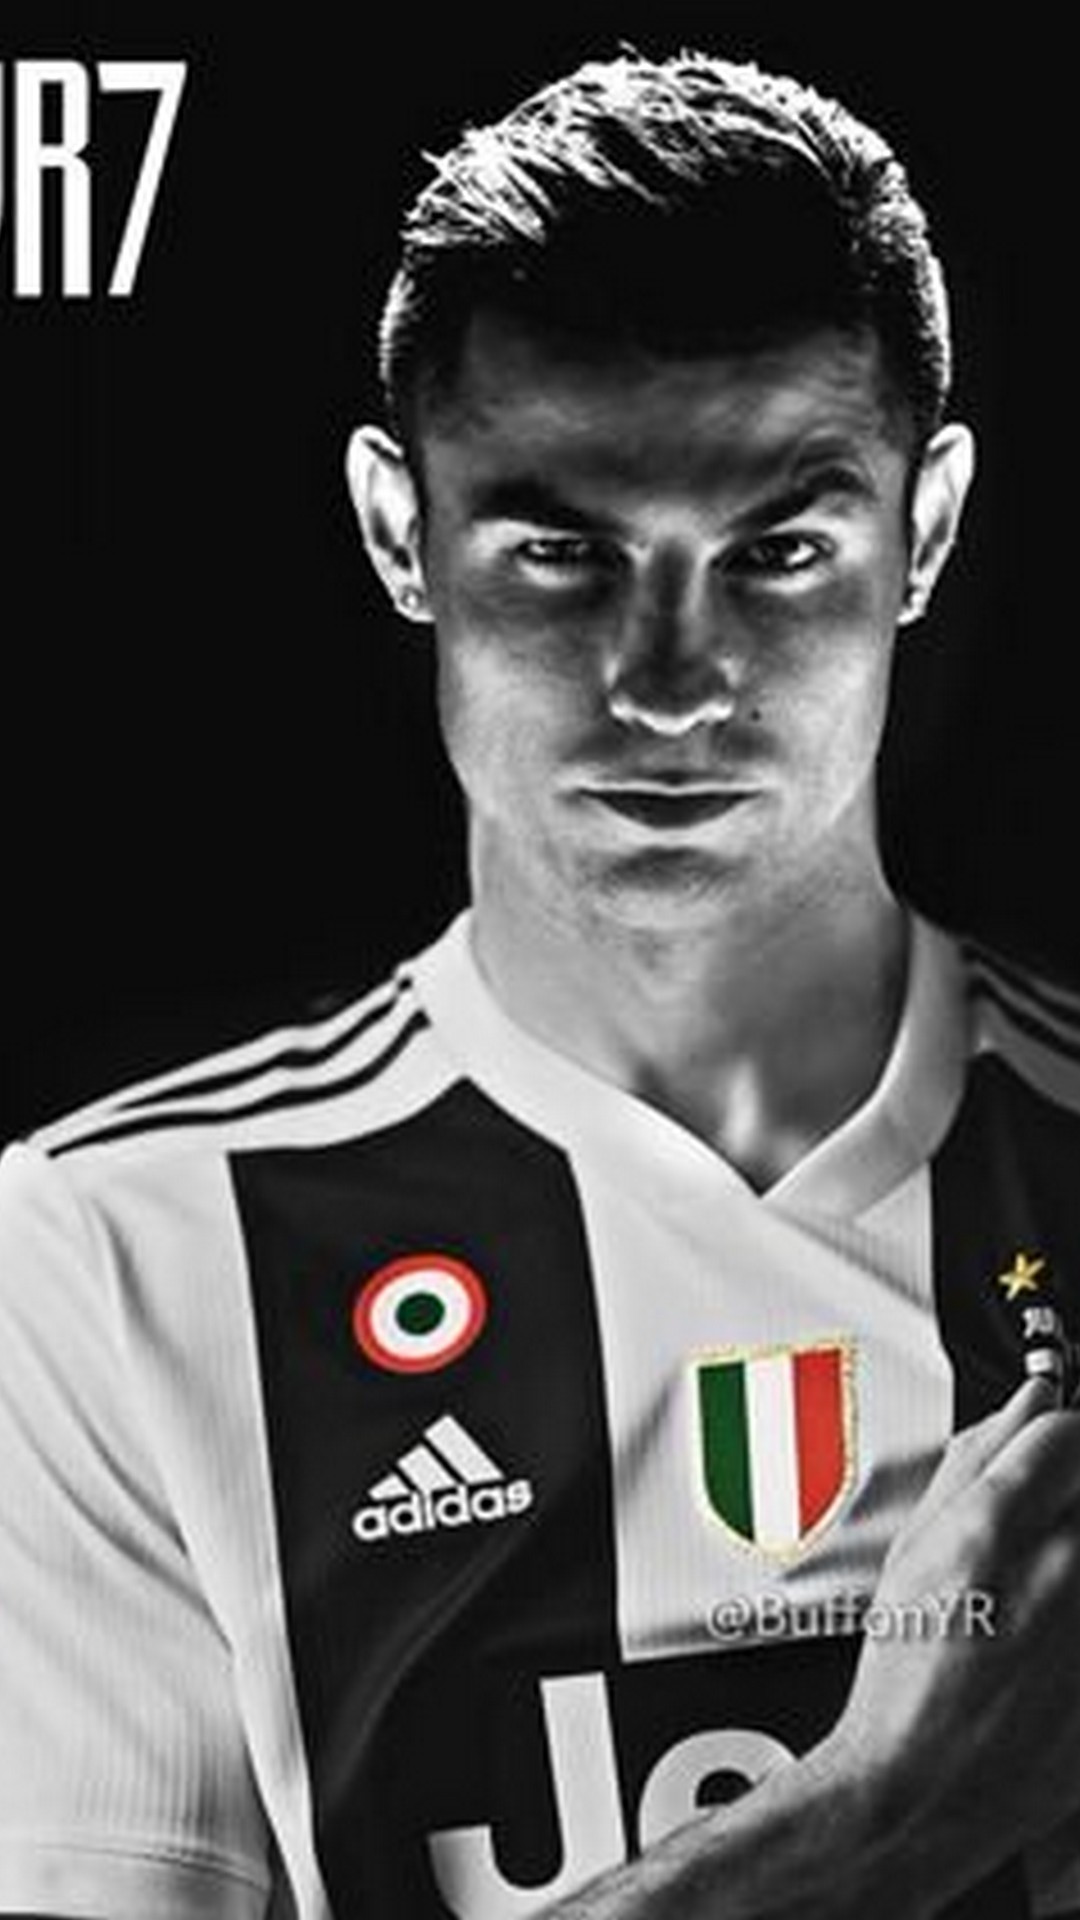 Cristiano Ronaldo Juventus Wallpaper Android with resolution 1080X1920 pixel. You can make this wallpaper for your Android backgrounds, Tablet, Smartphones Screensavers and Mobile Phone Lock Screen